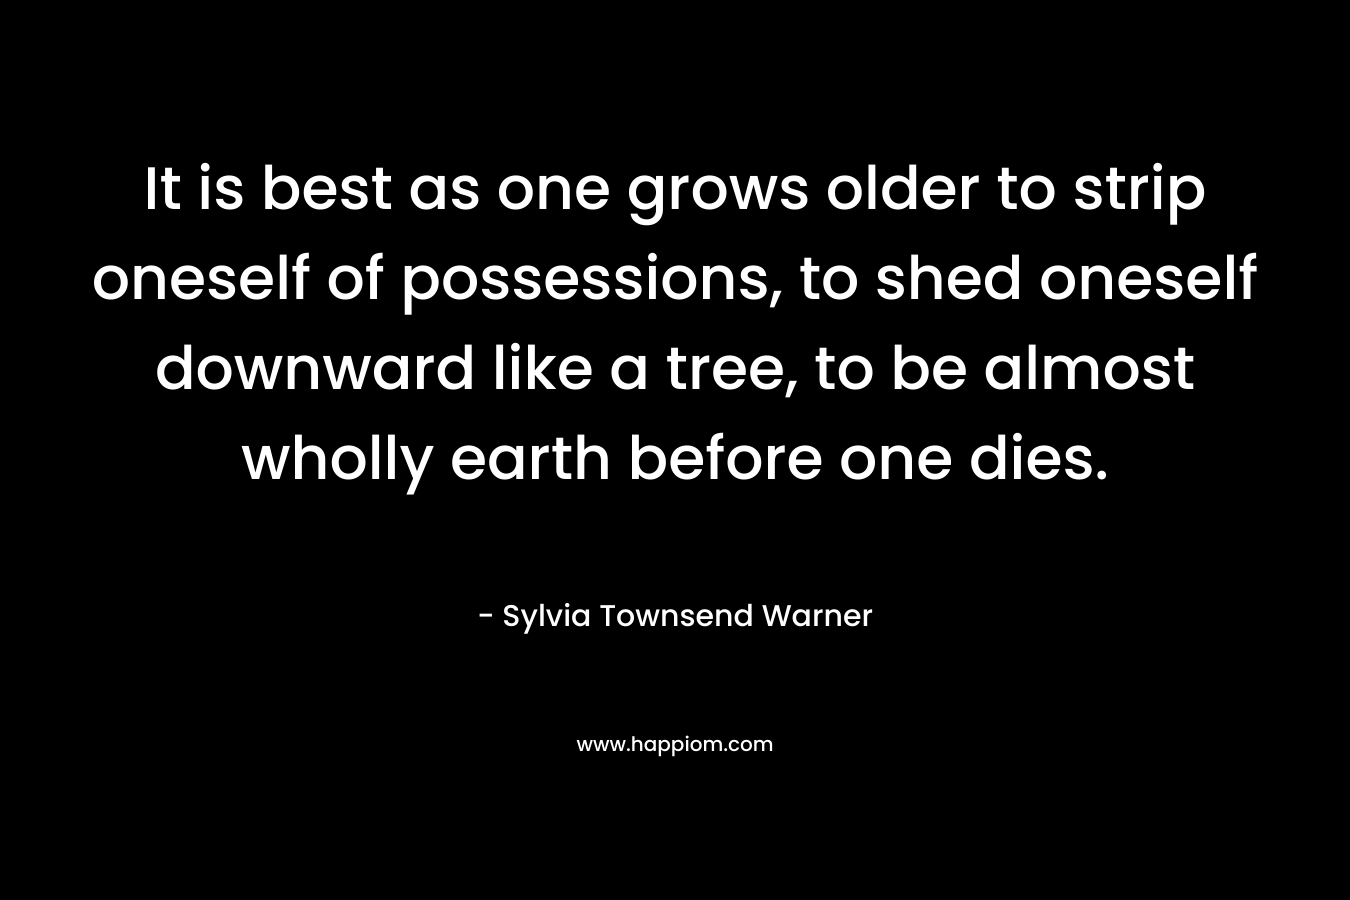 It is best as one grows older to strip oneself of possessions, to shed oneself downward like a tree, to be almost wholly earth before one dies. – Sylvia Townsend Warner